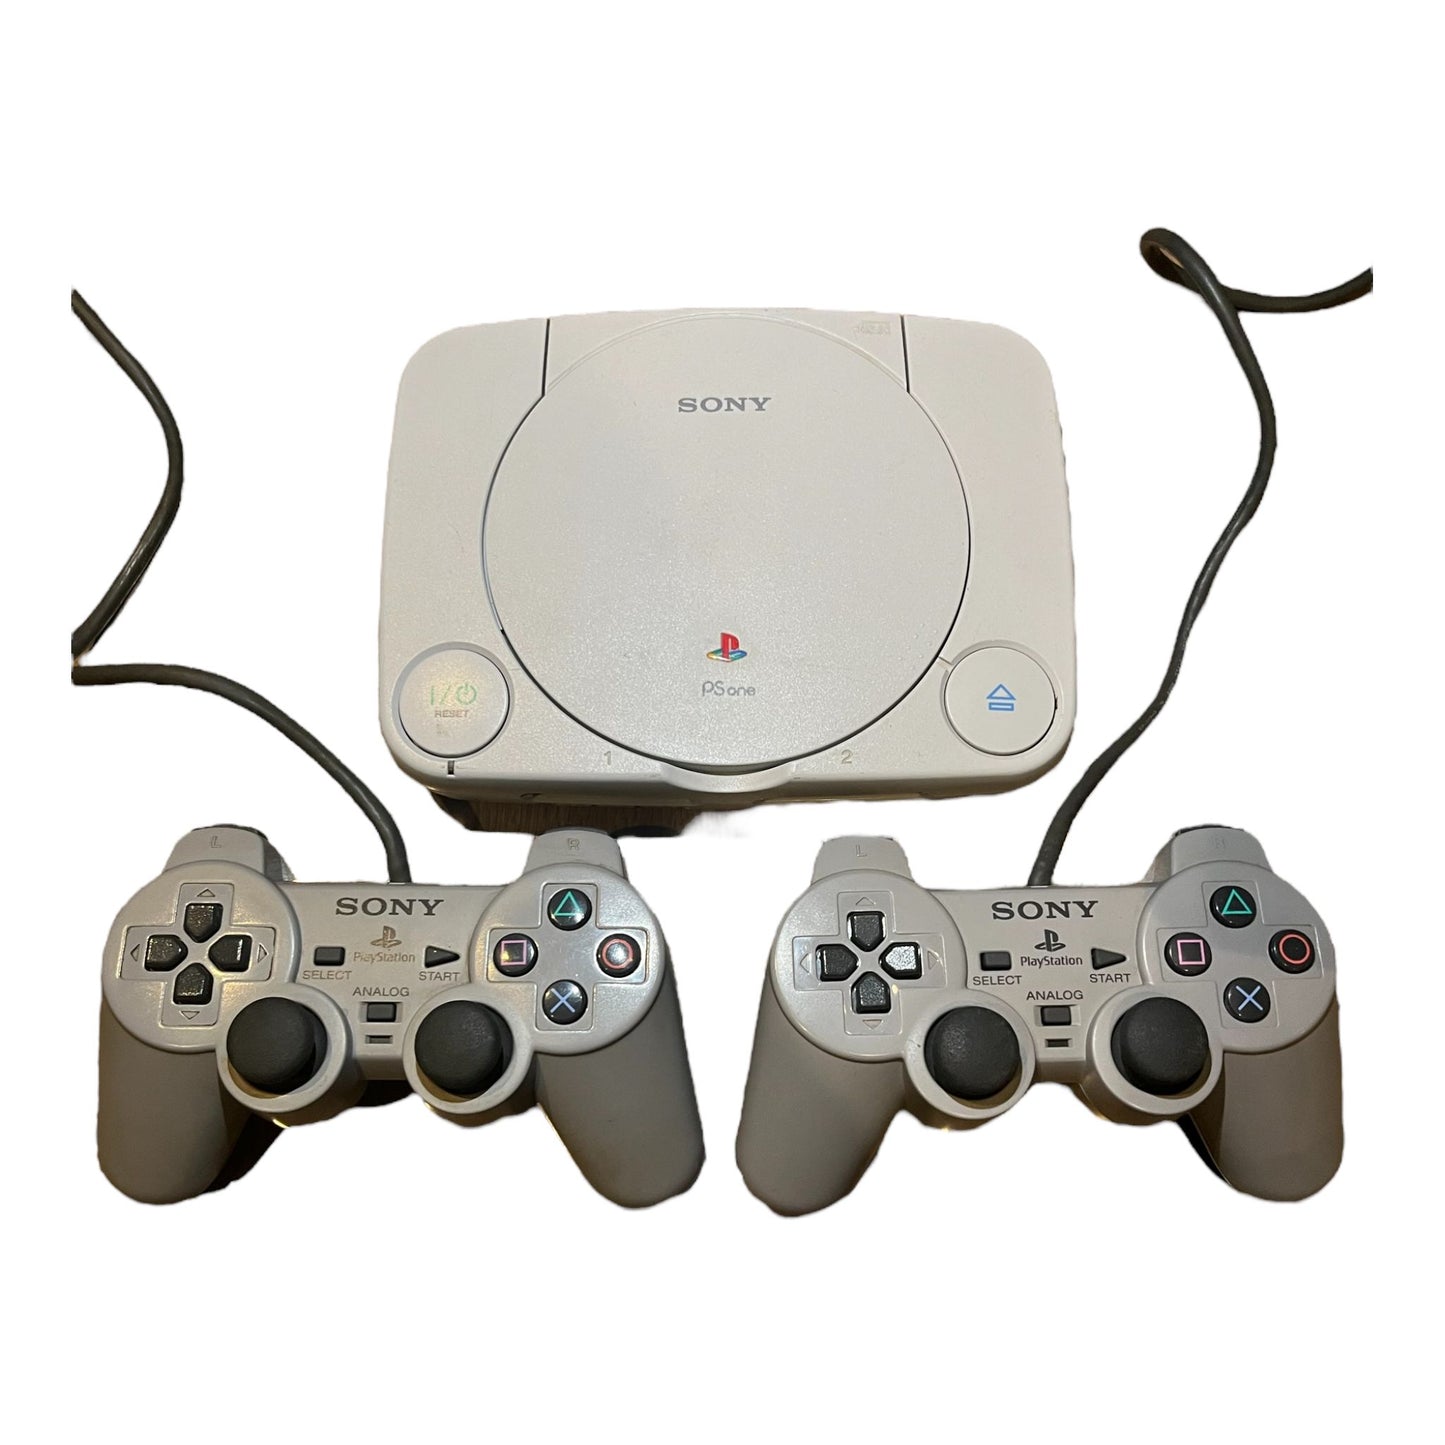 Playstation 1 Console MINI + 2 Controller's